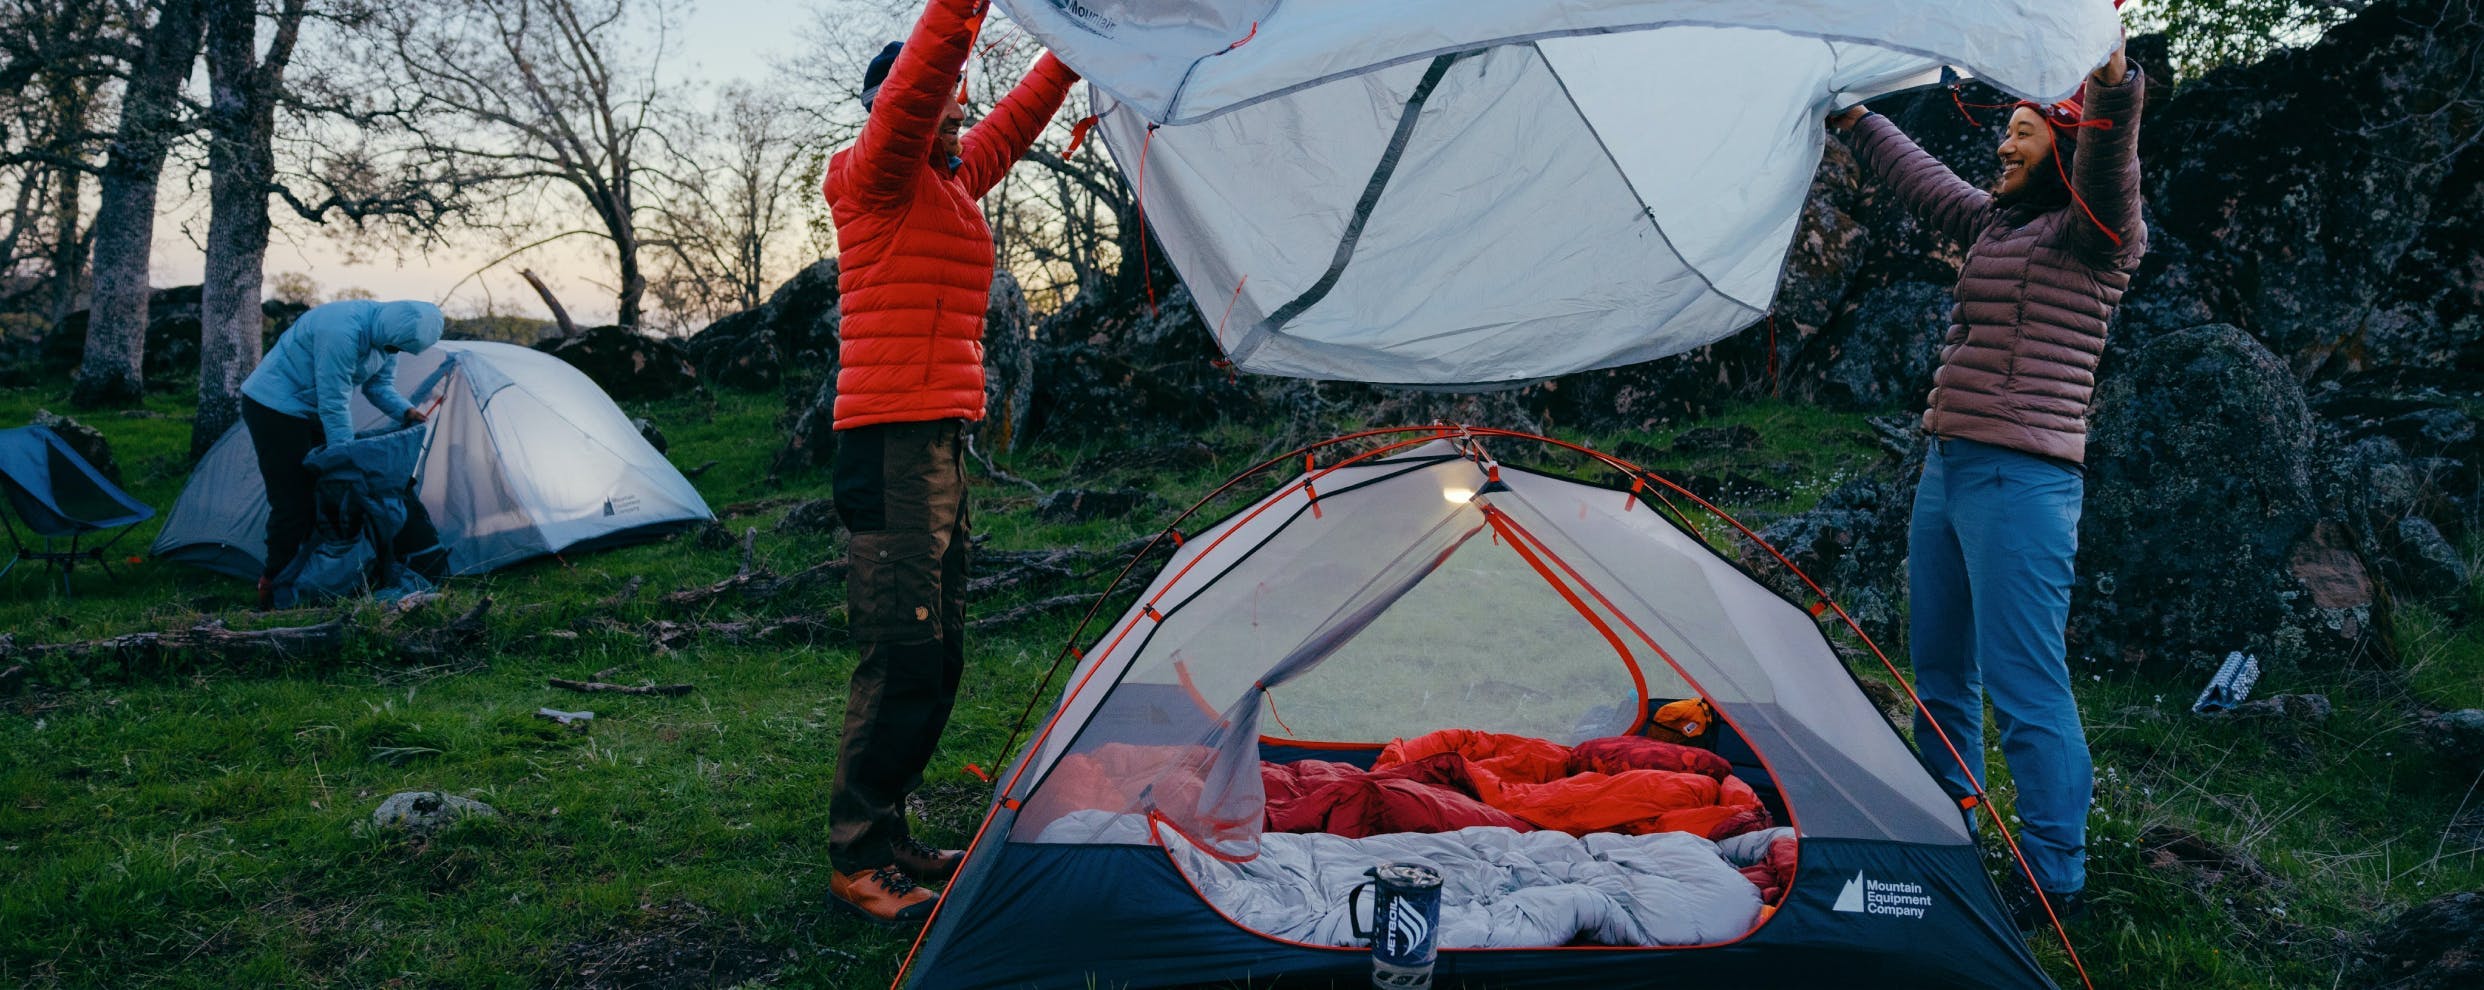 The latest, lightest, roomiest and coziest camp gear to make wild spaces feel like home.